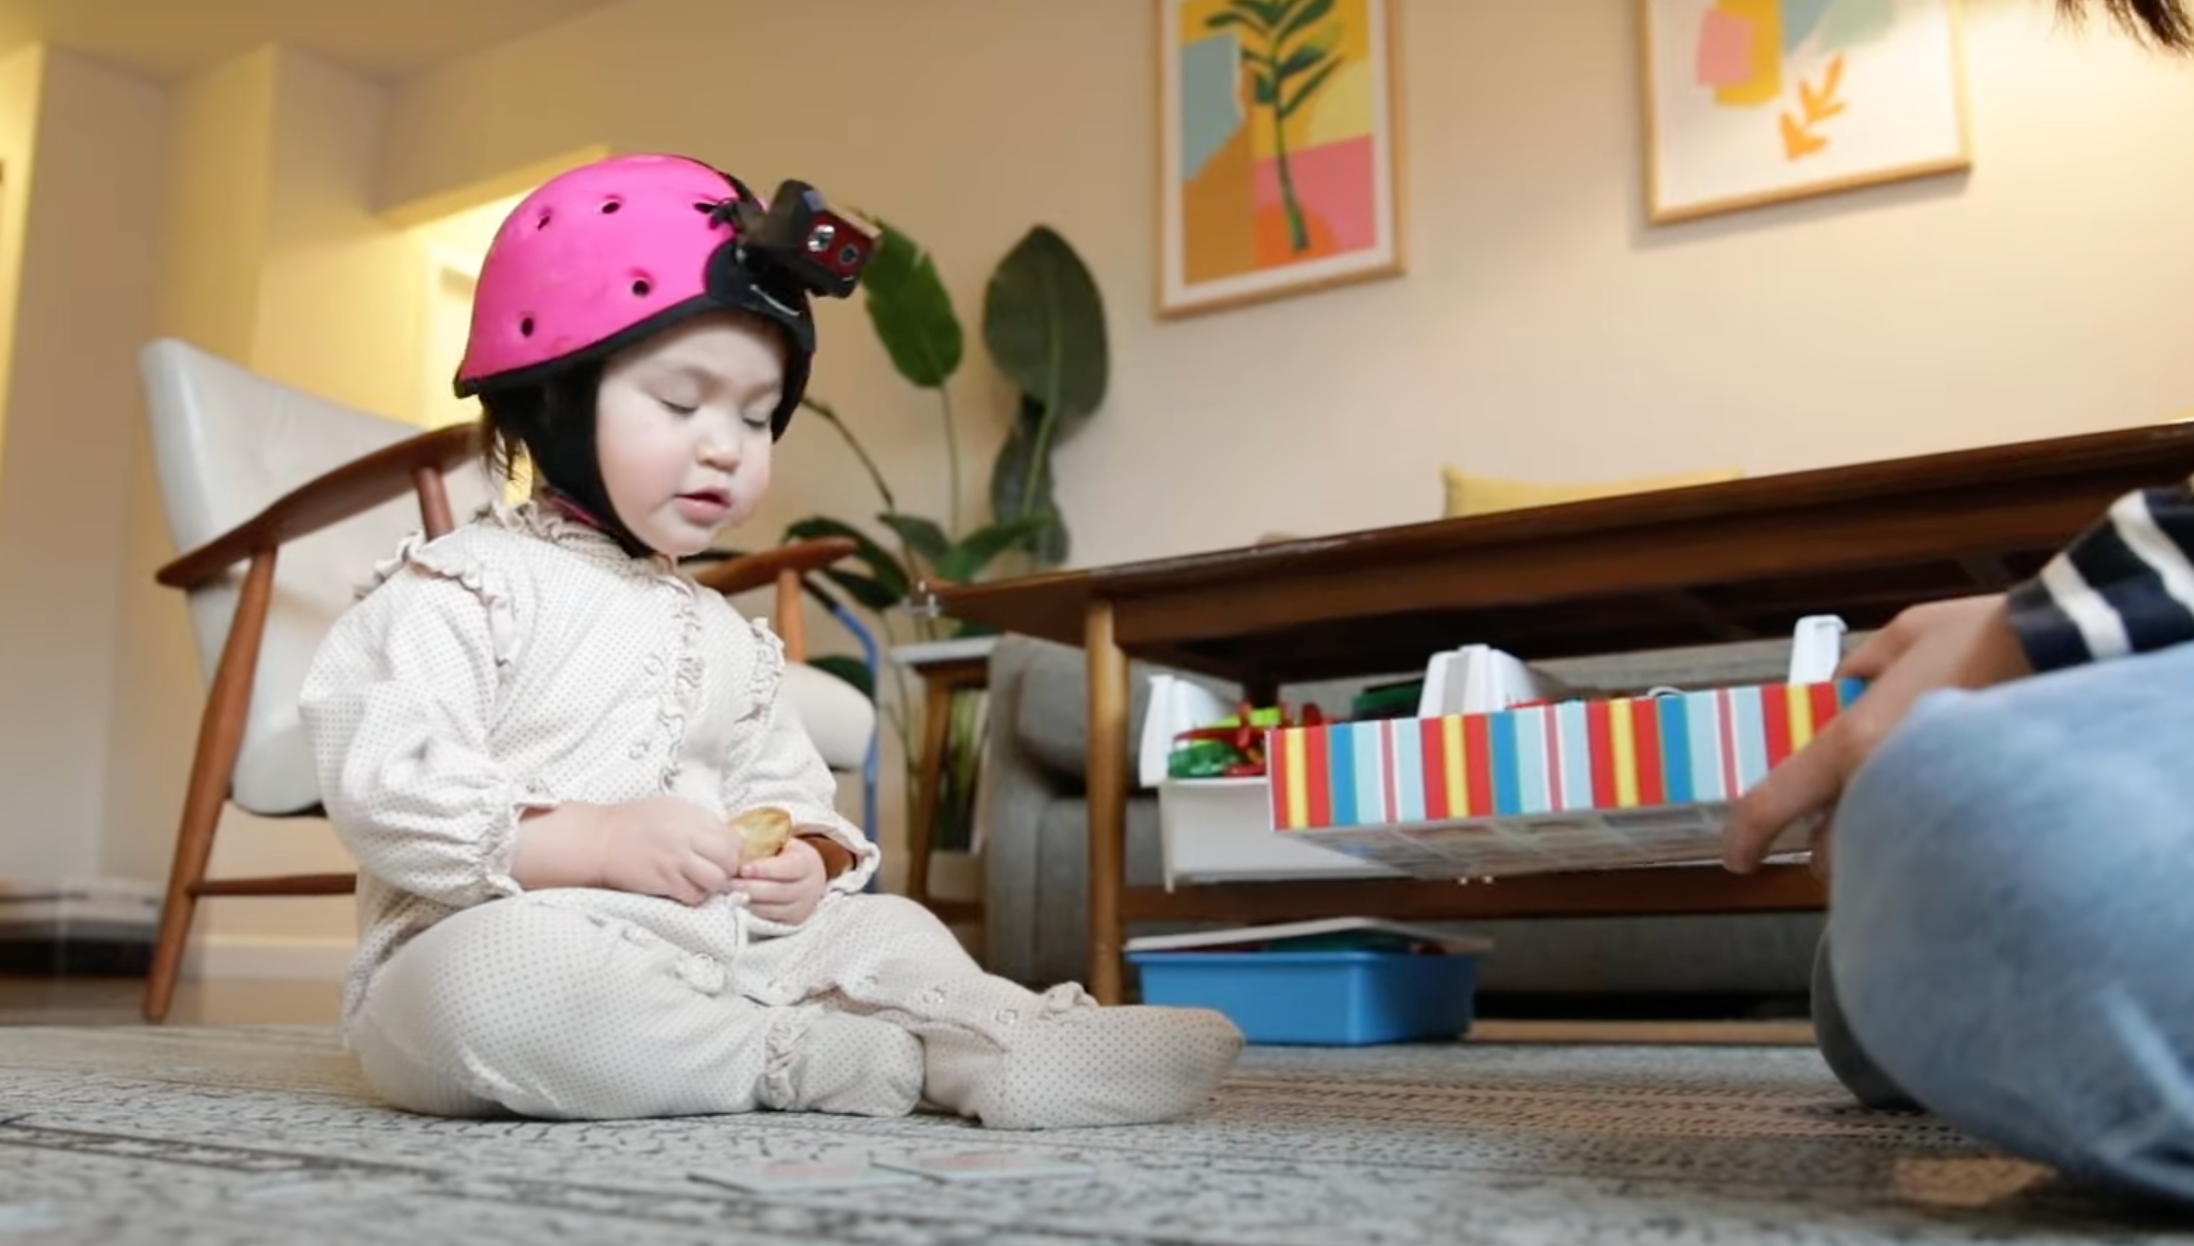 Scientists train AI using video frames captured from a child wearing a head-mounted camera